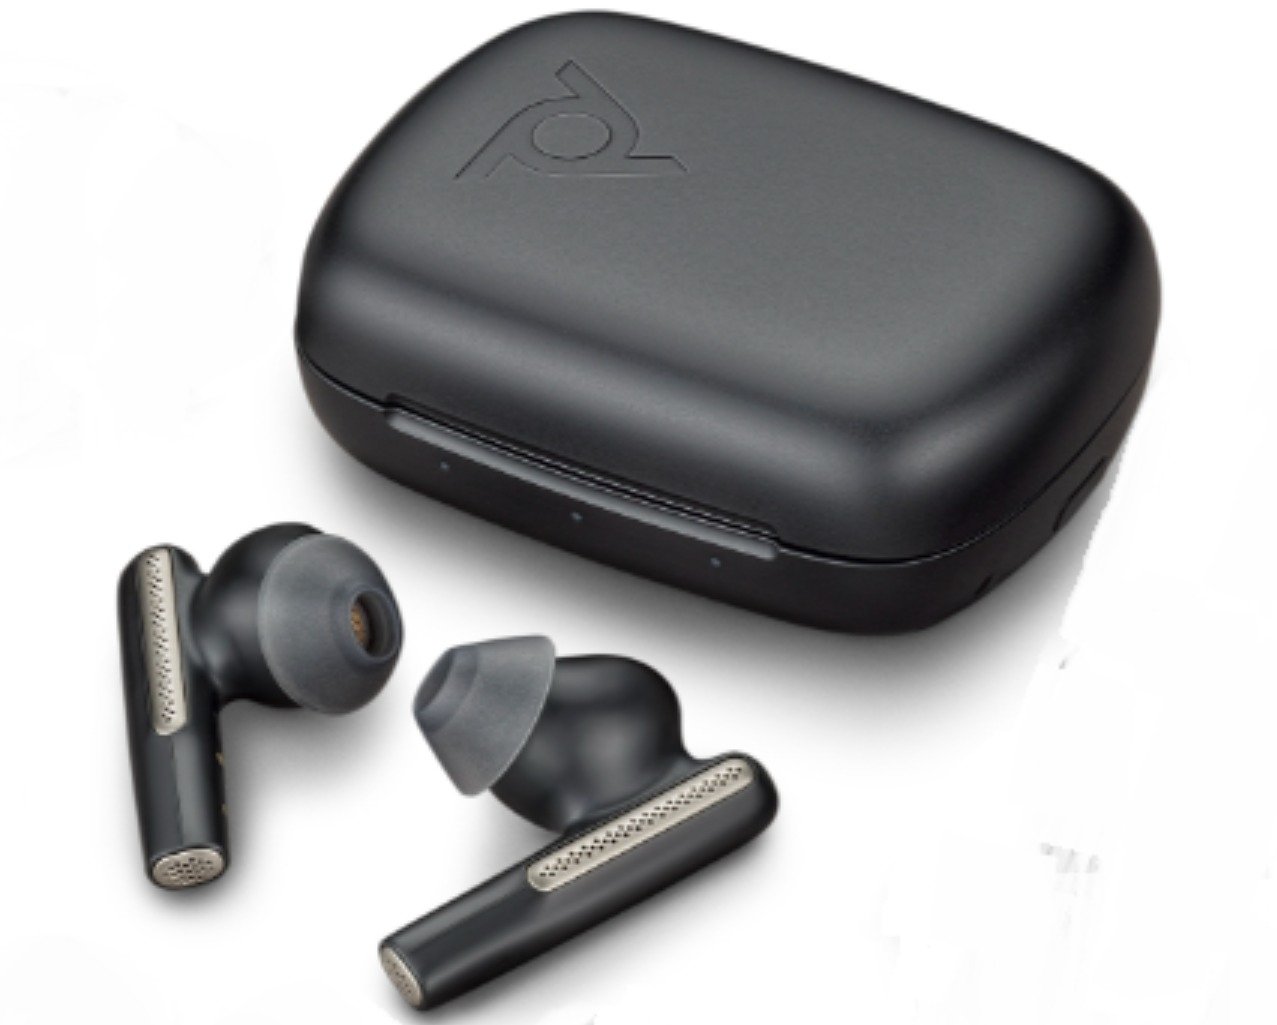 Poly Voyager Free 60 True Wireless Earbuds - Graphite Black - Headset Advisor